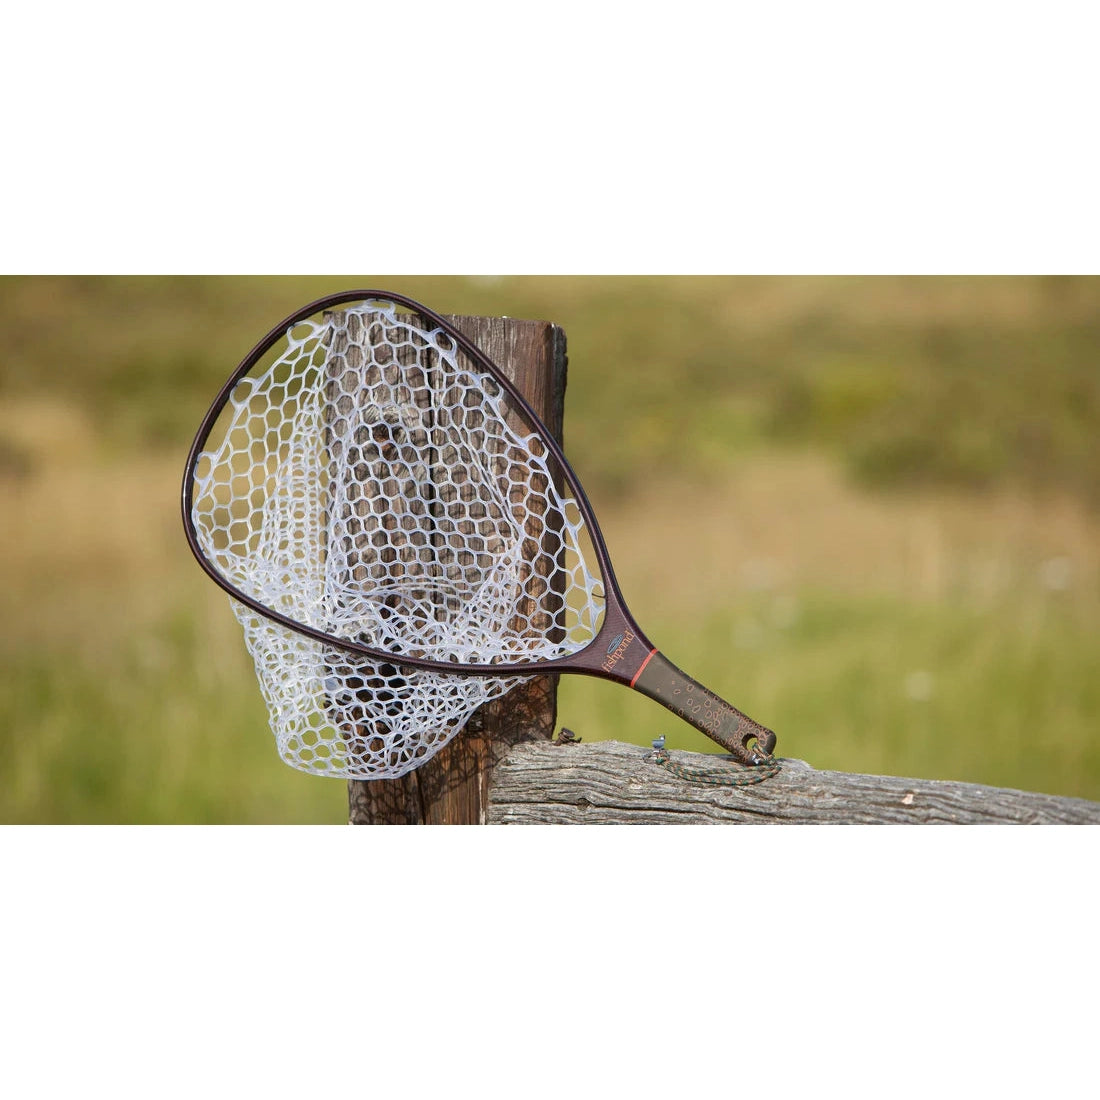 Nomad Boat Net by Fishpond - fly fishing nets